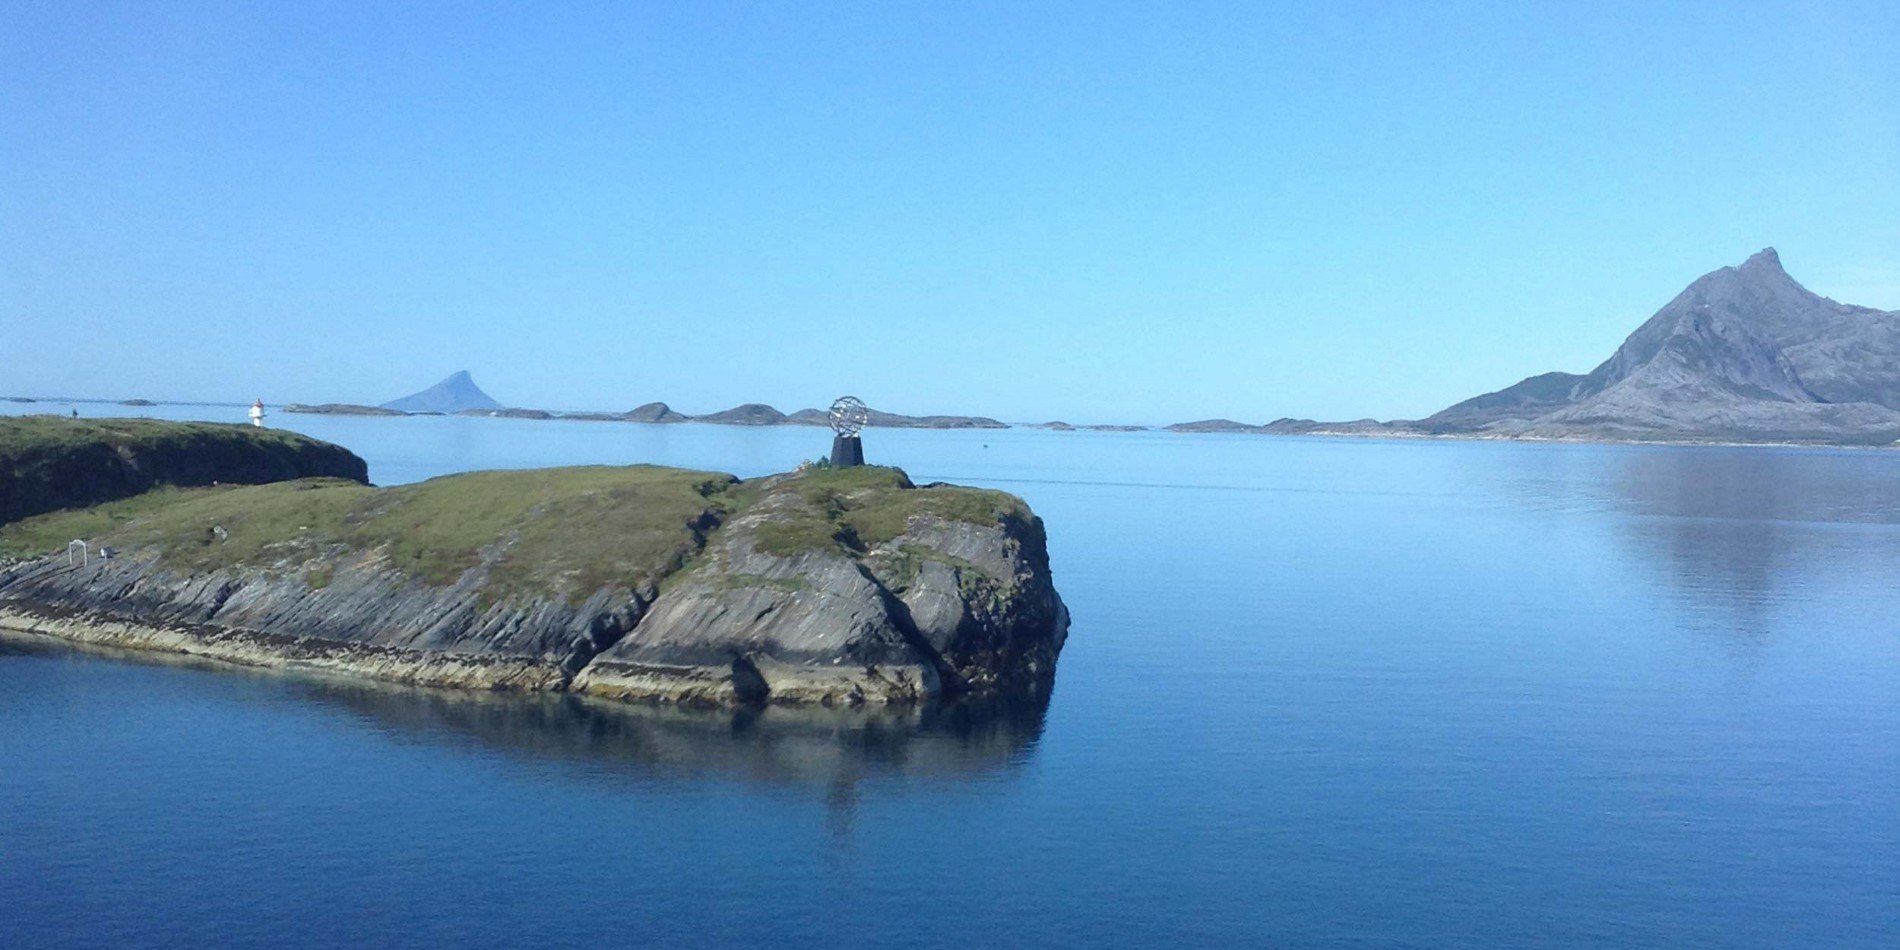 The Vikingen island with a lighthouse and the Arctic Circle monument